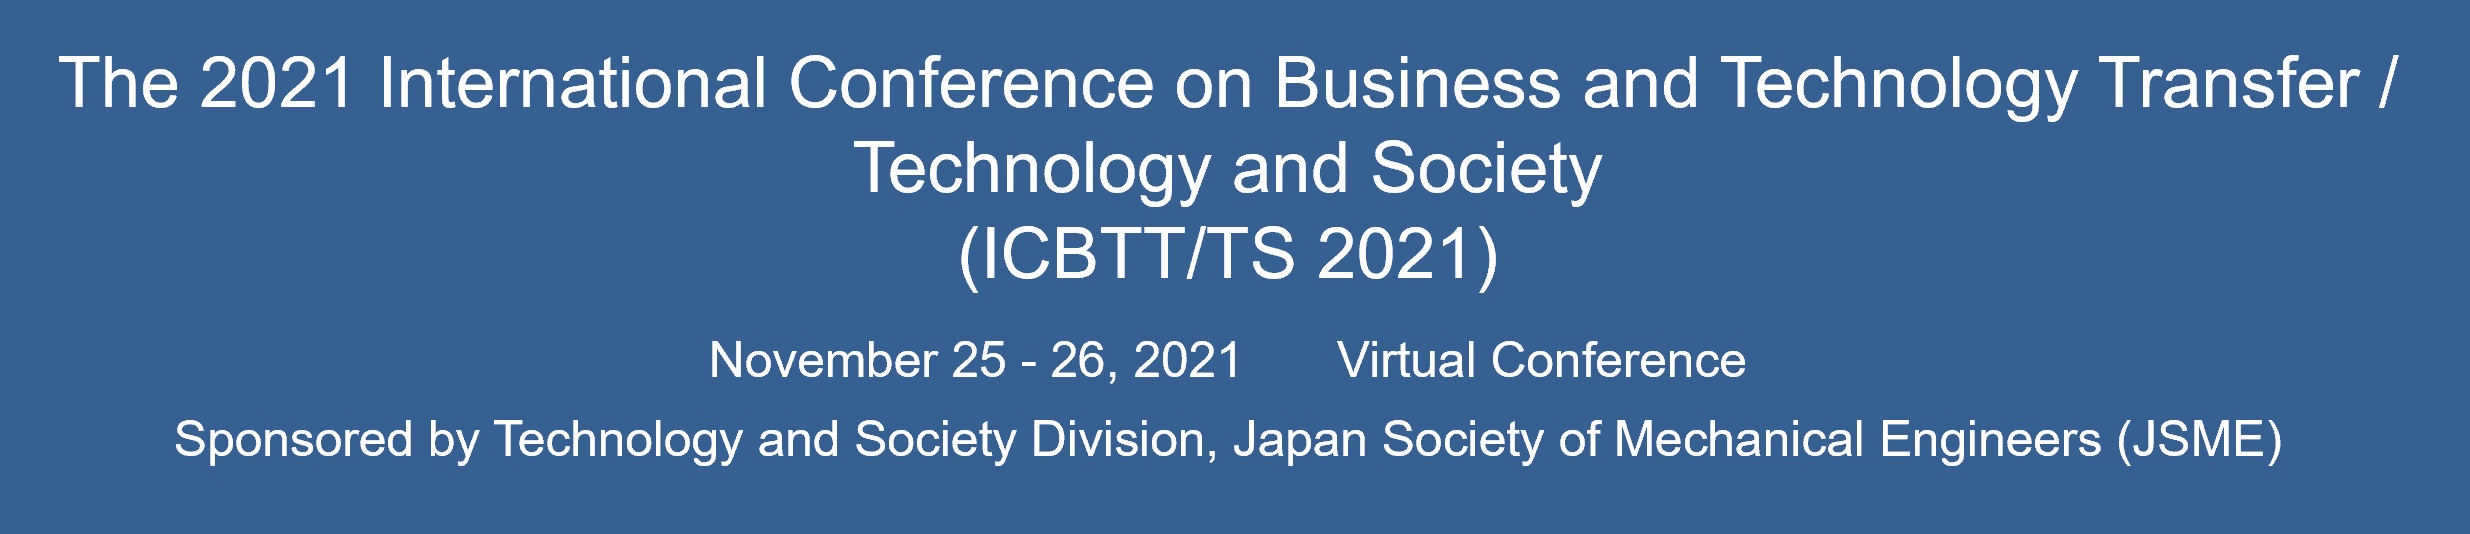 The 2021 International Conference on Business and Technology Transfer / Technology and Society (ICBTT/TS 2021)